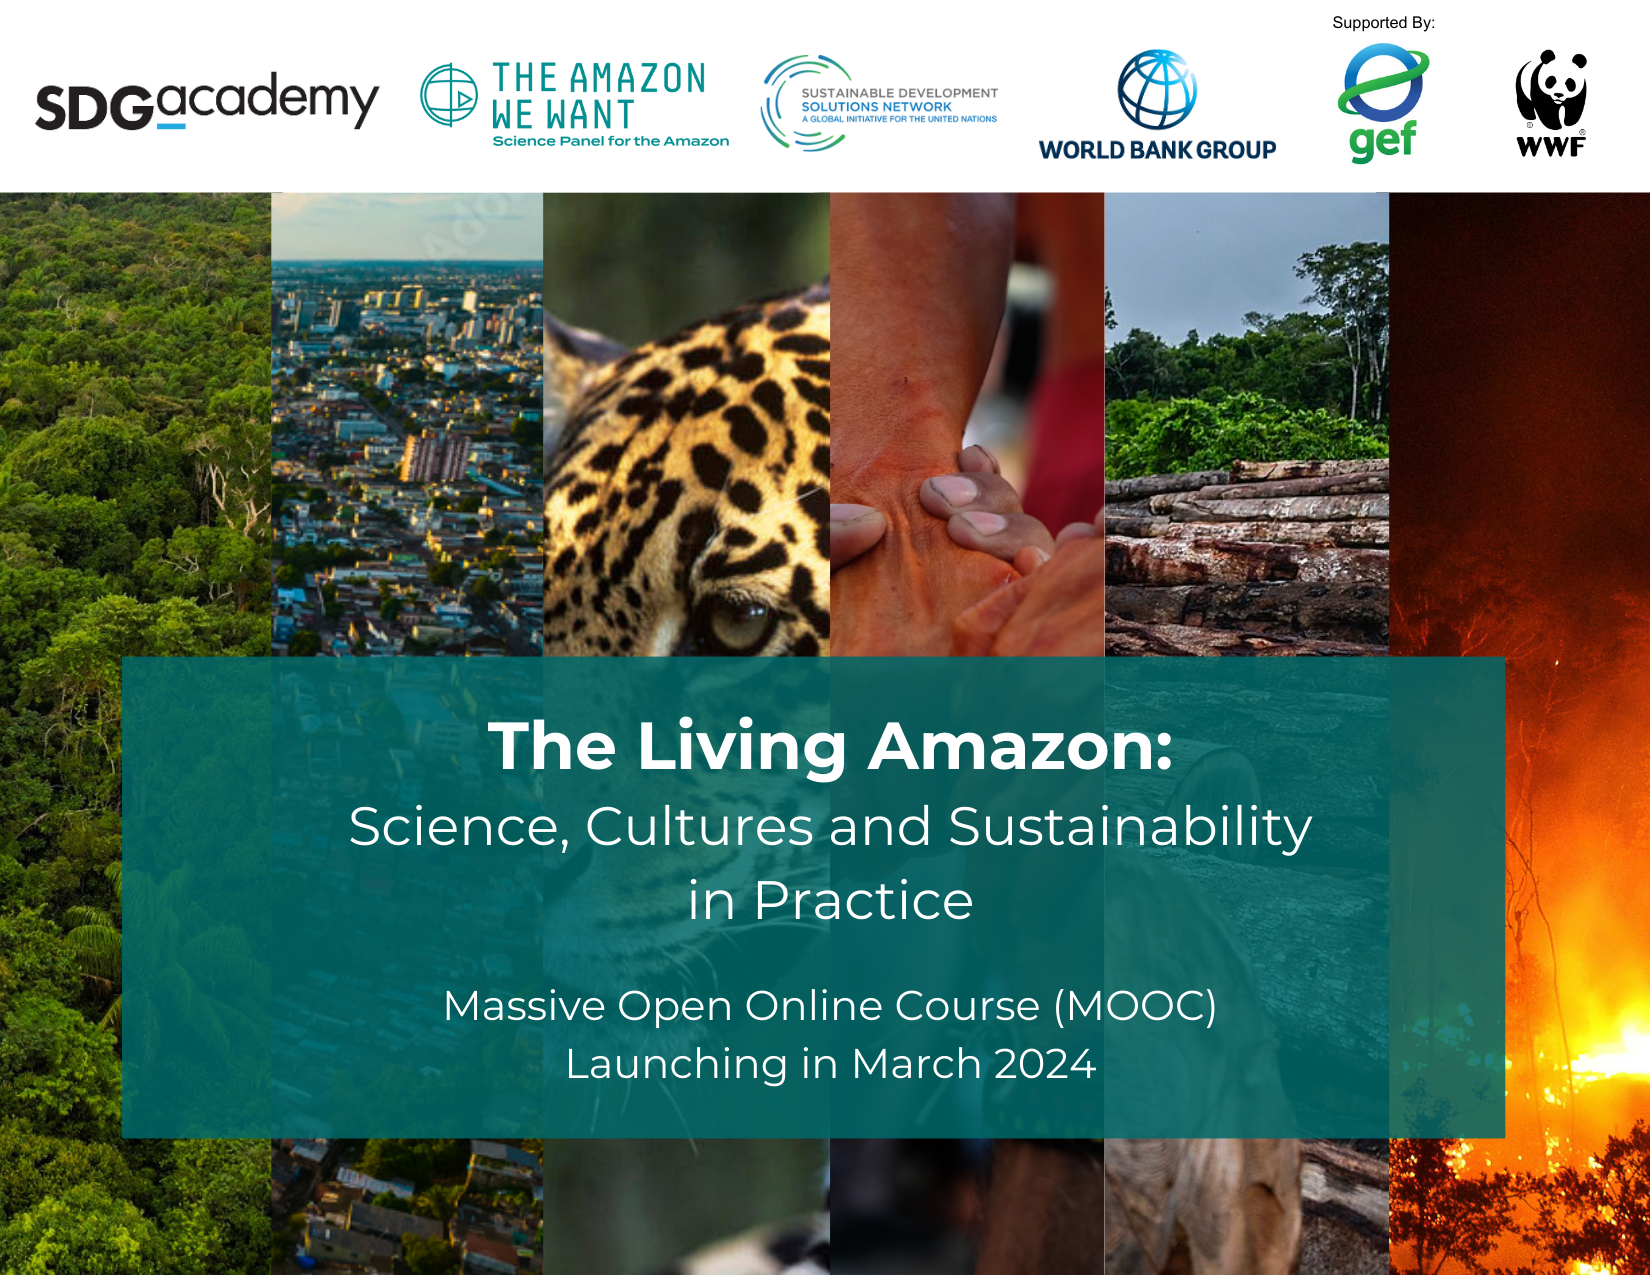 The Living Amazon: Science, Cultures and Sustainability in Practice